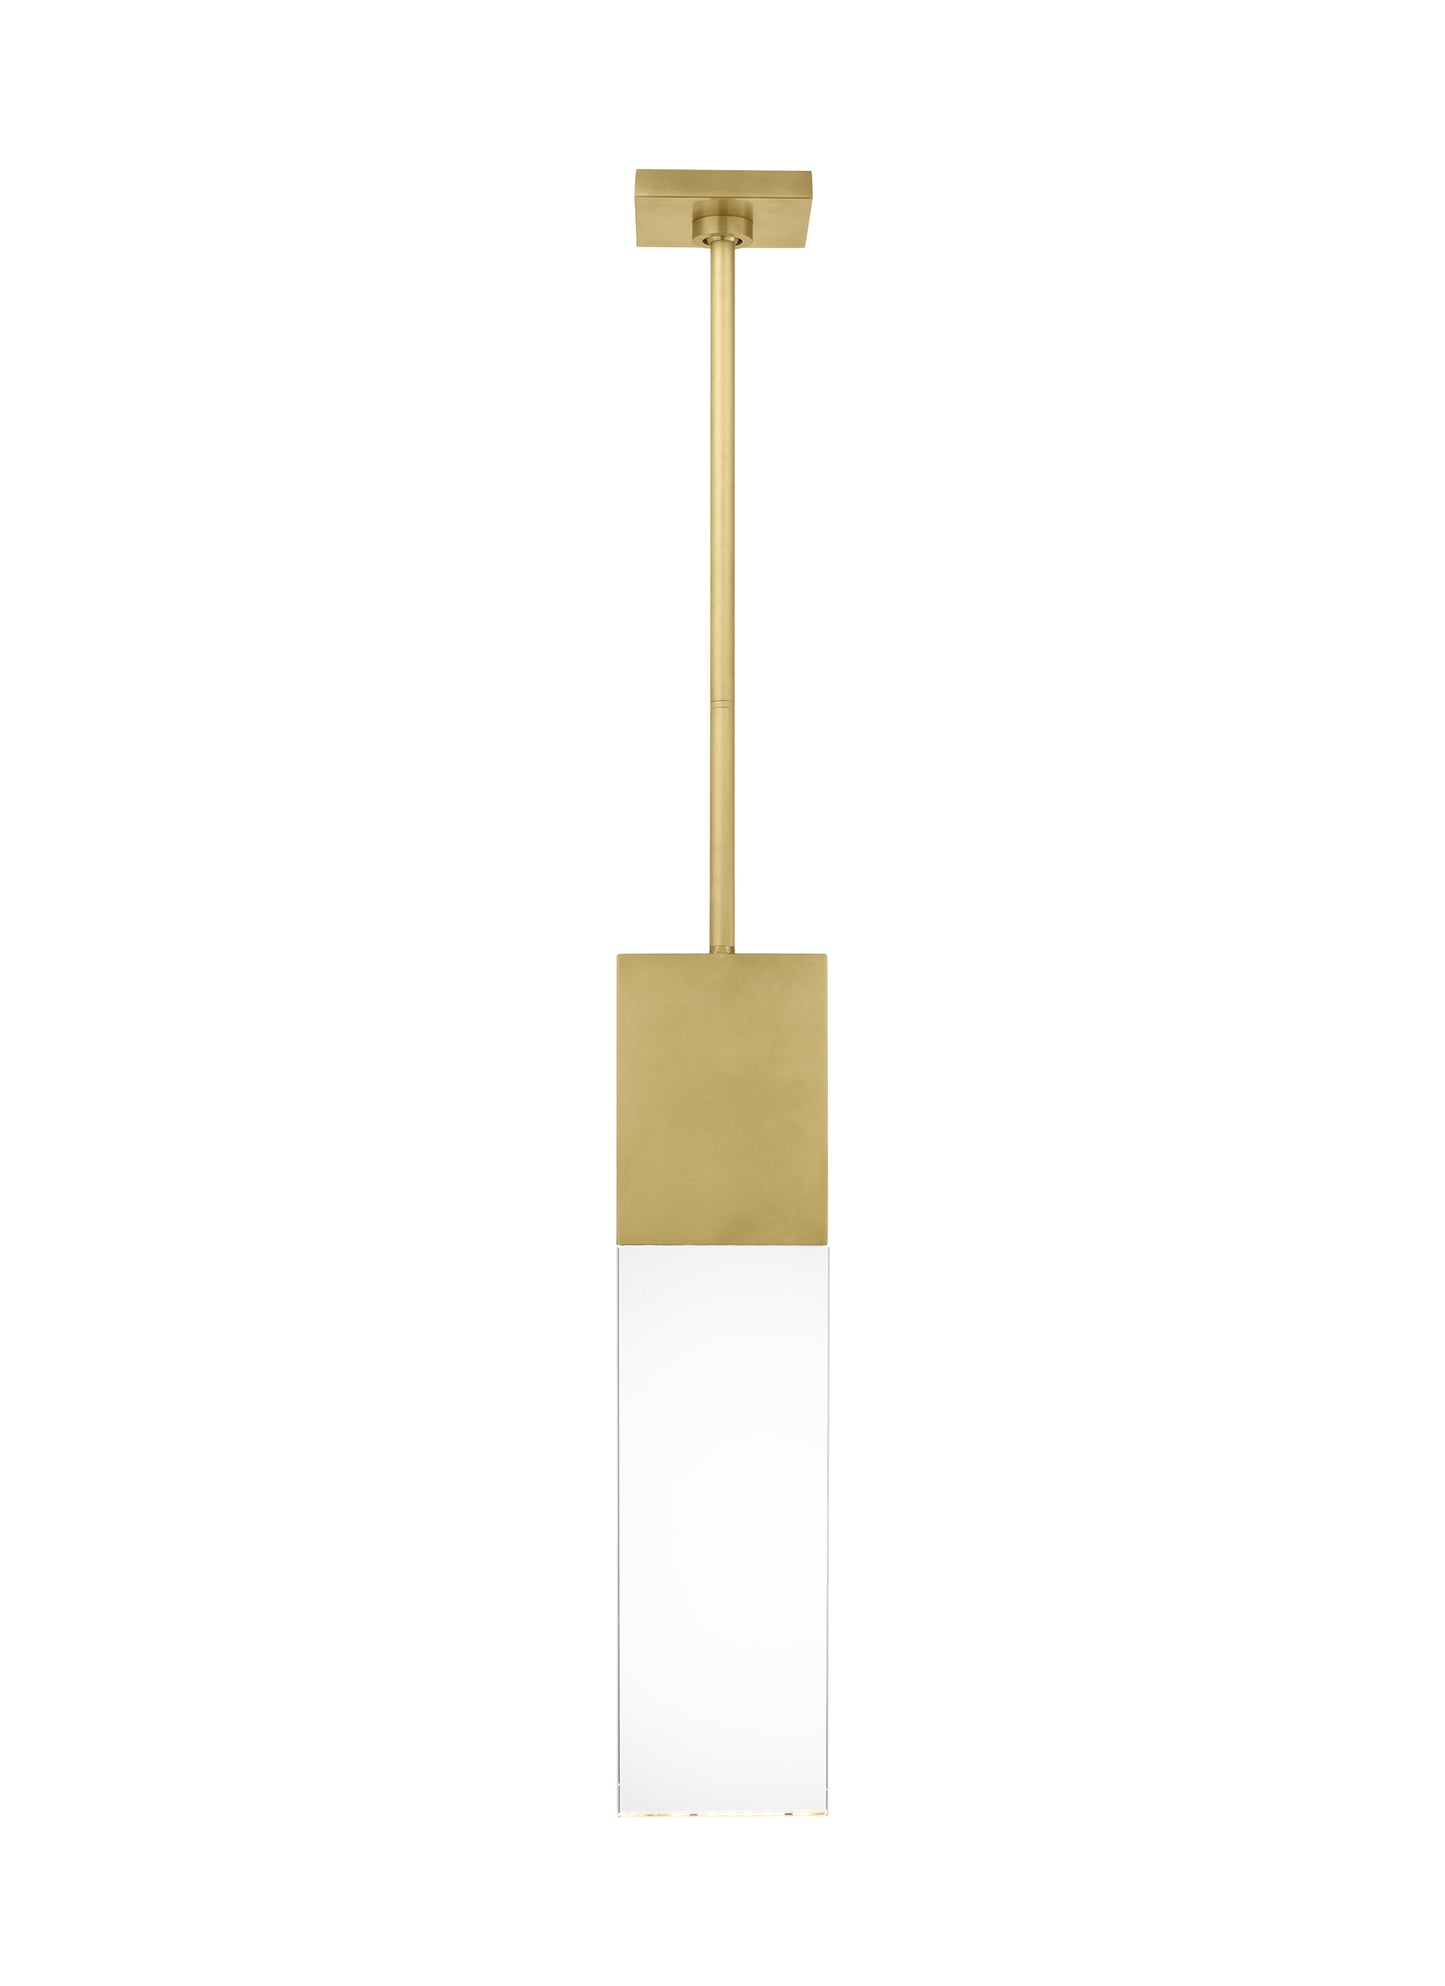 Contemporary Hanging Light Fixture for Stylish Interiors